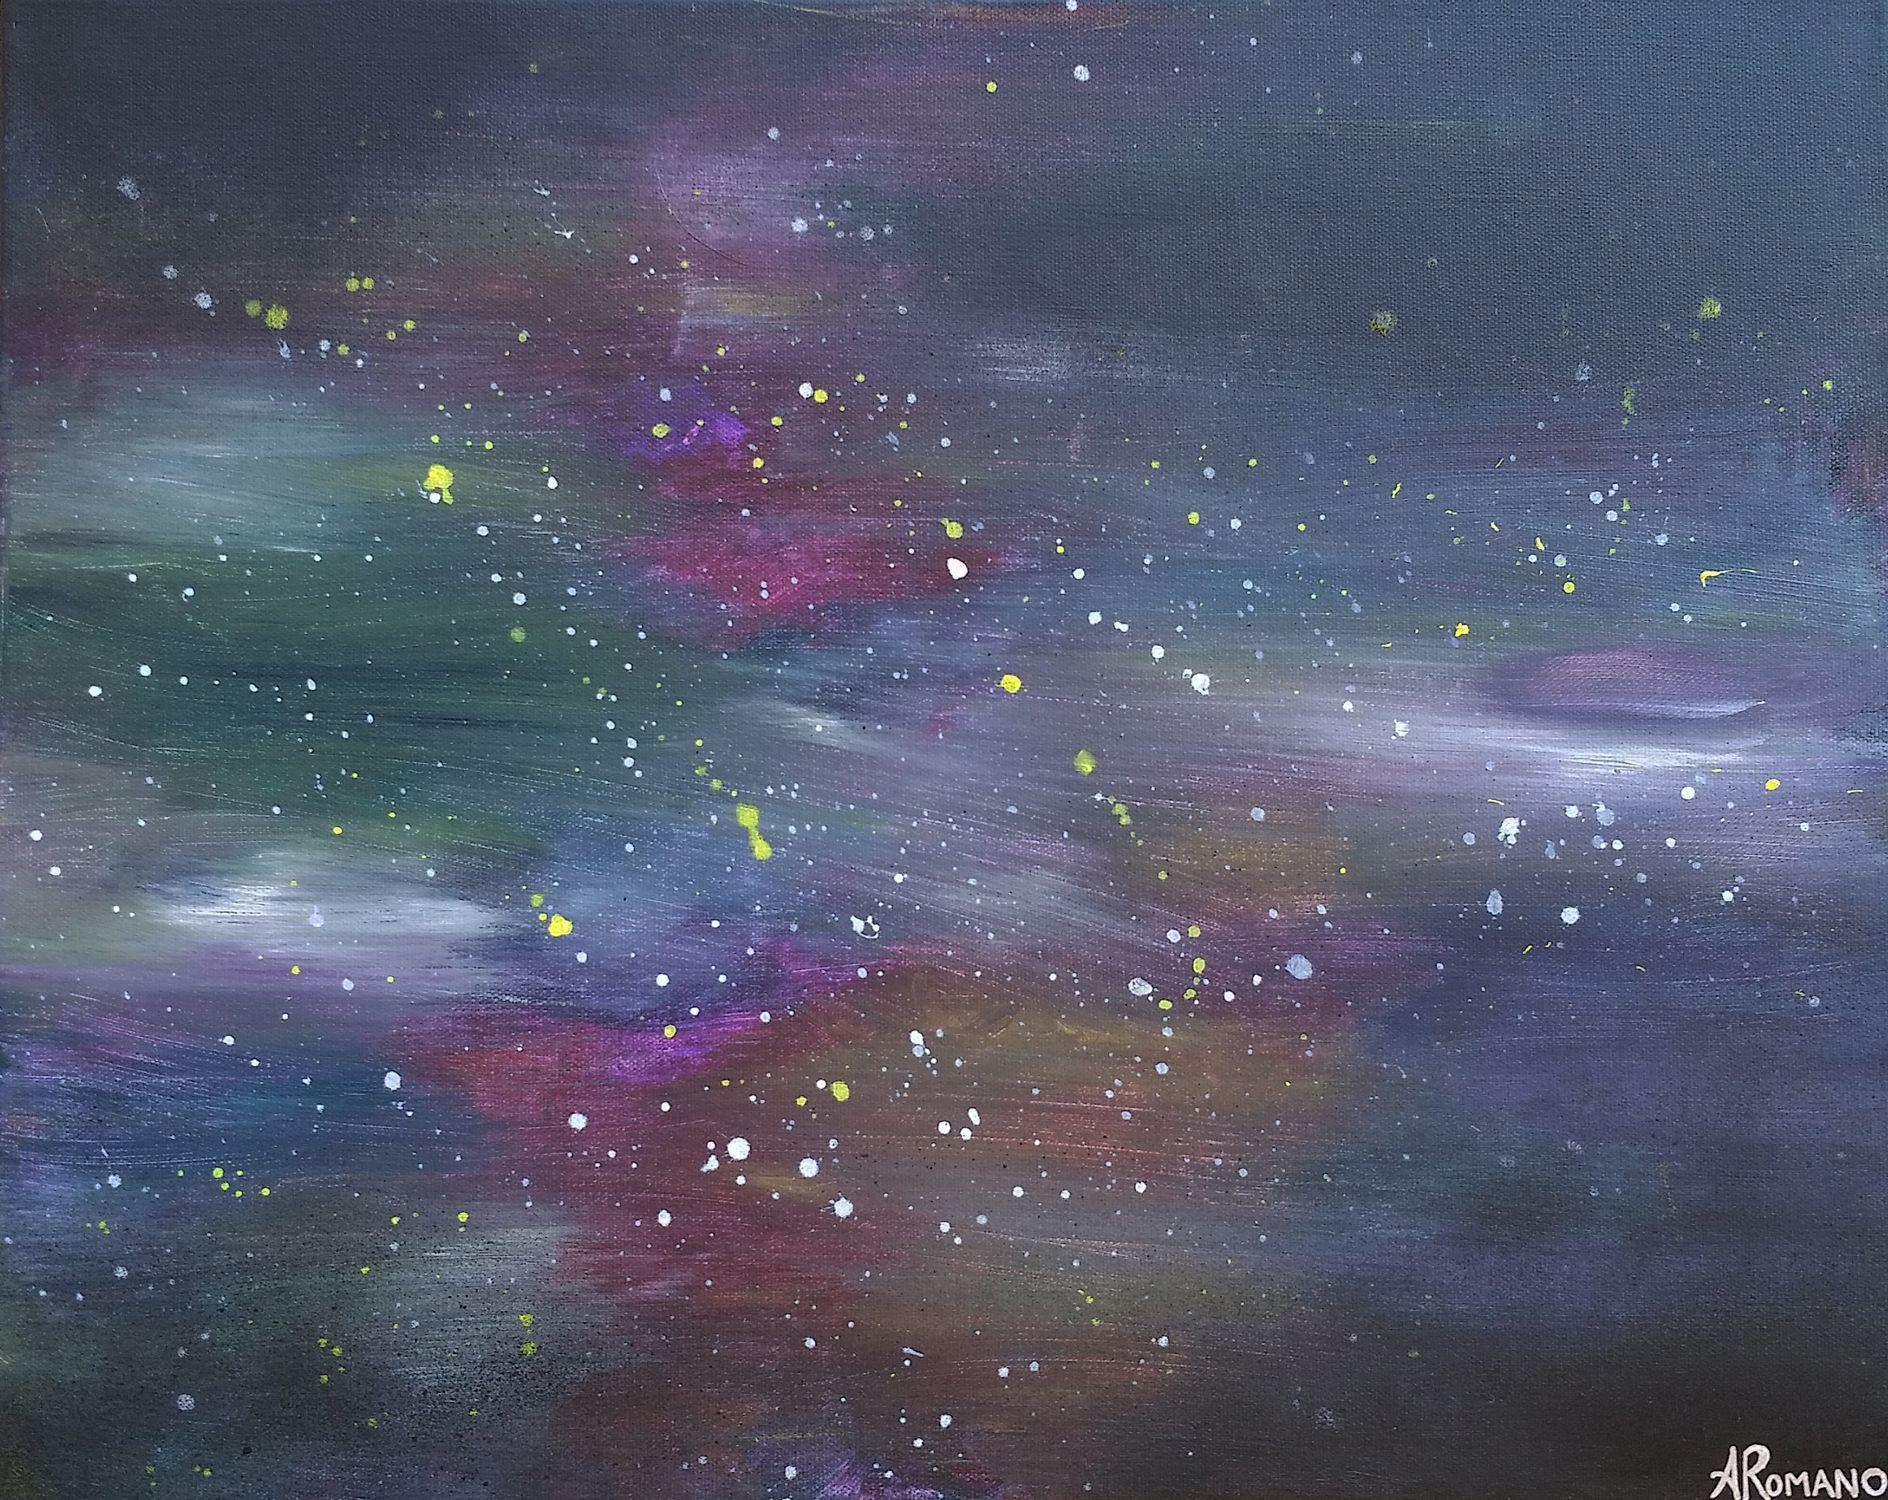 Abstract painting with expressive brushstroke movement that captures the essence of outer space with dark navy blue and black contrasted with green, magenta, and violet tones and stars that represent the cosmos done in splatter paint style.   